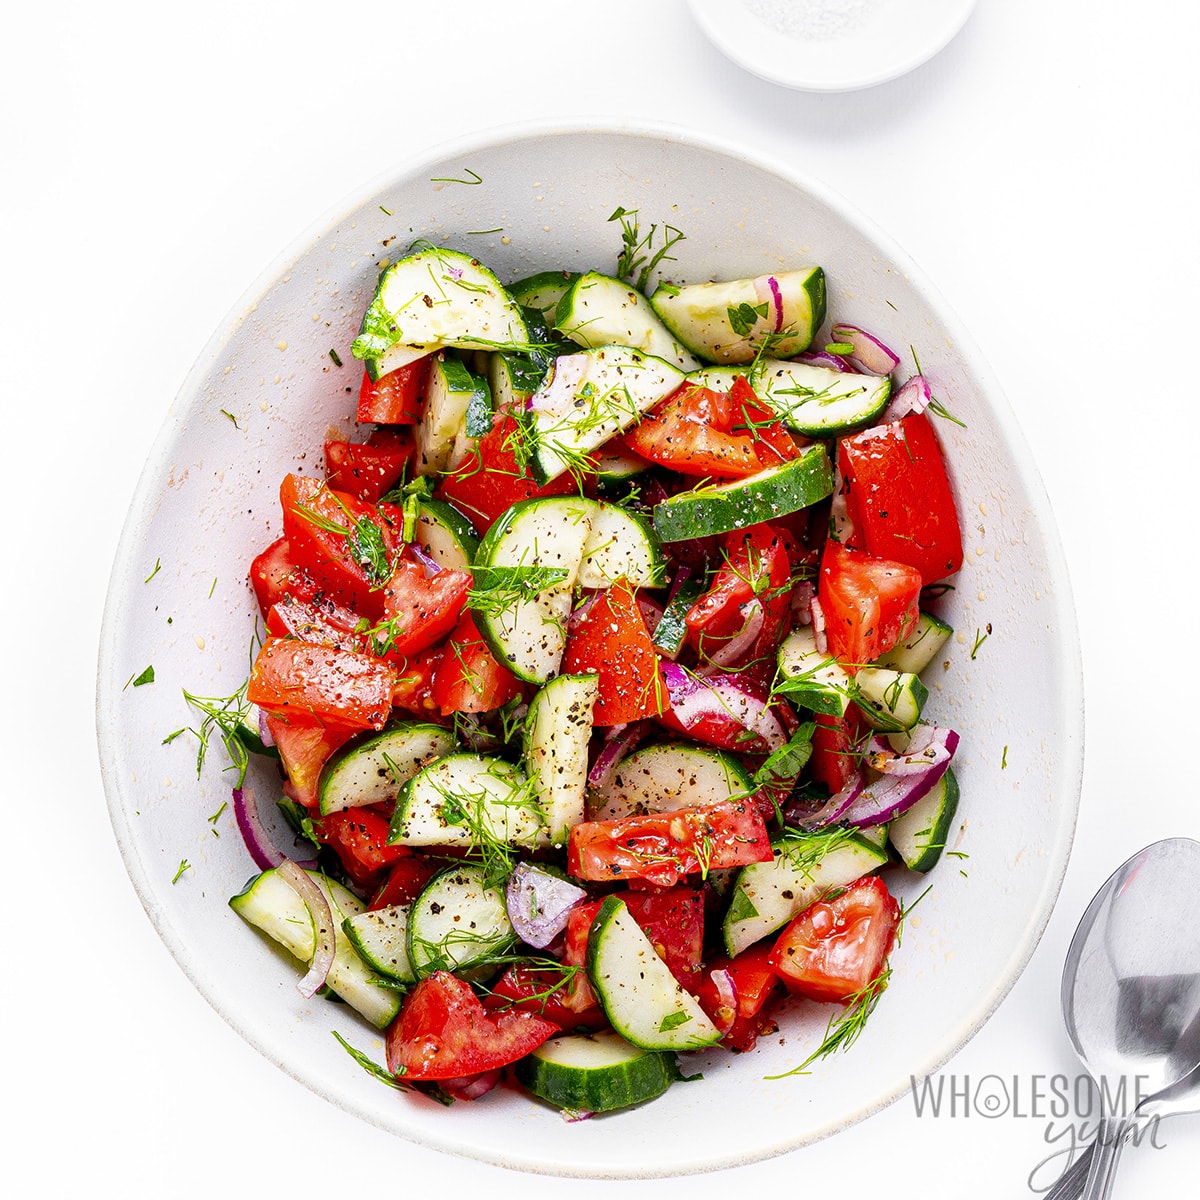 Dressing drizzled on cucumber and tomato salad.